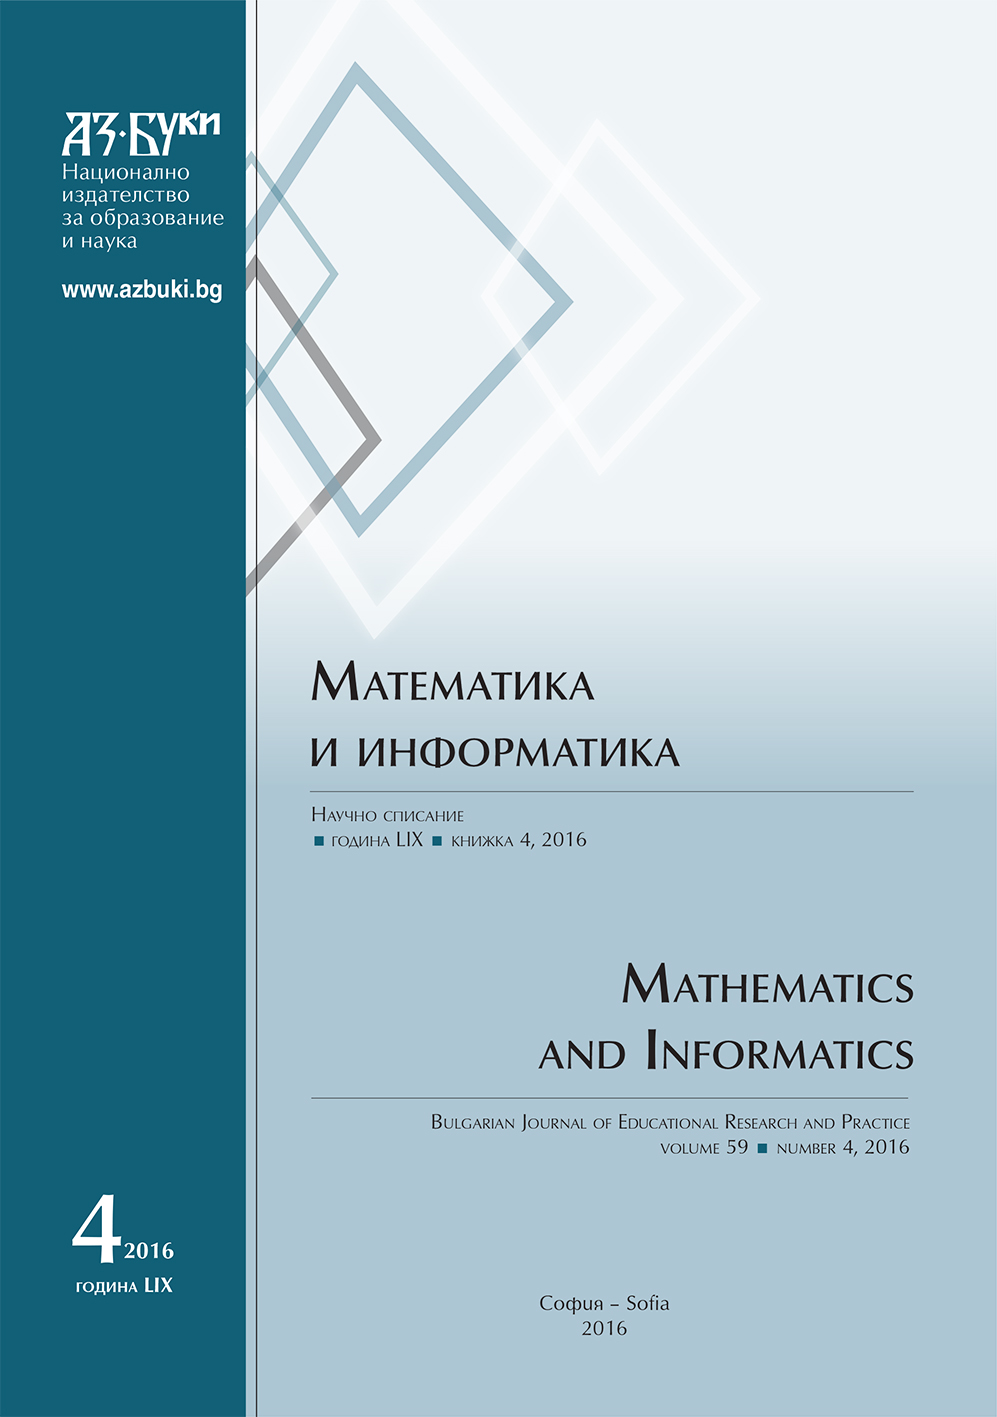 Comparative Analysis of the Students’ Scores in Solving Constructive Tasks when Geometry is Studied in a Standard Way and with the Use of Complex Numbers Cover Image